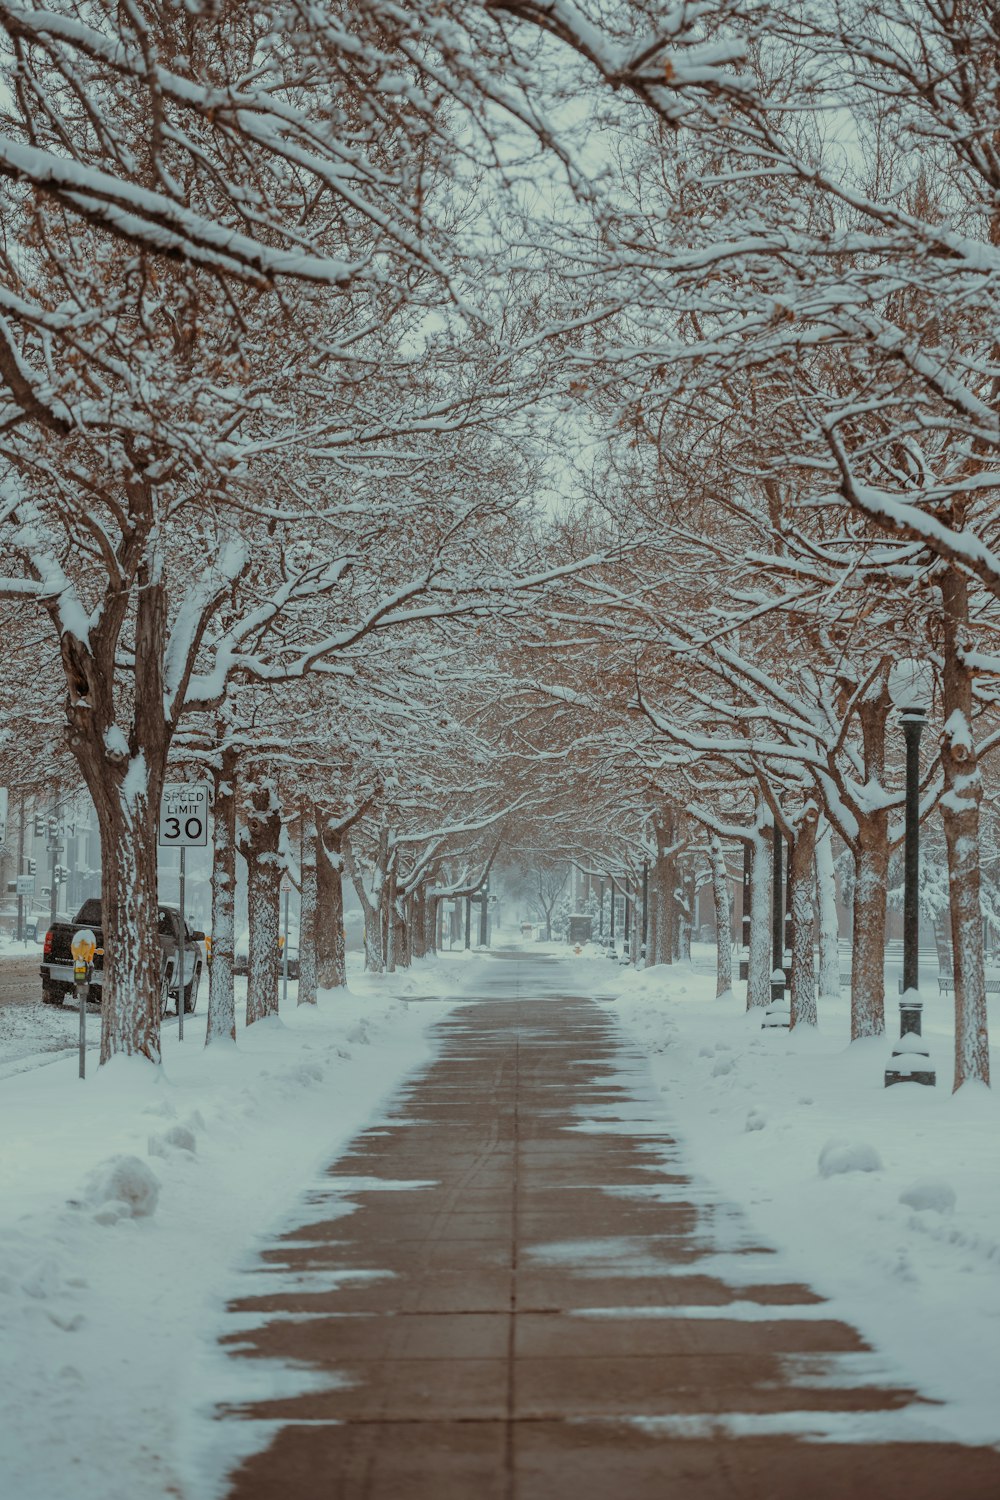 a snowy street lined with trees and street signs